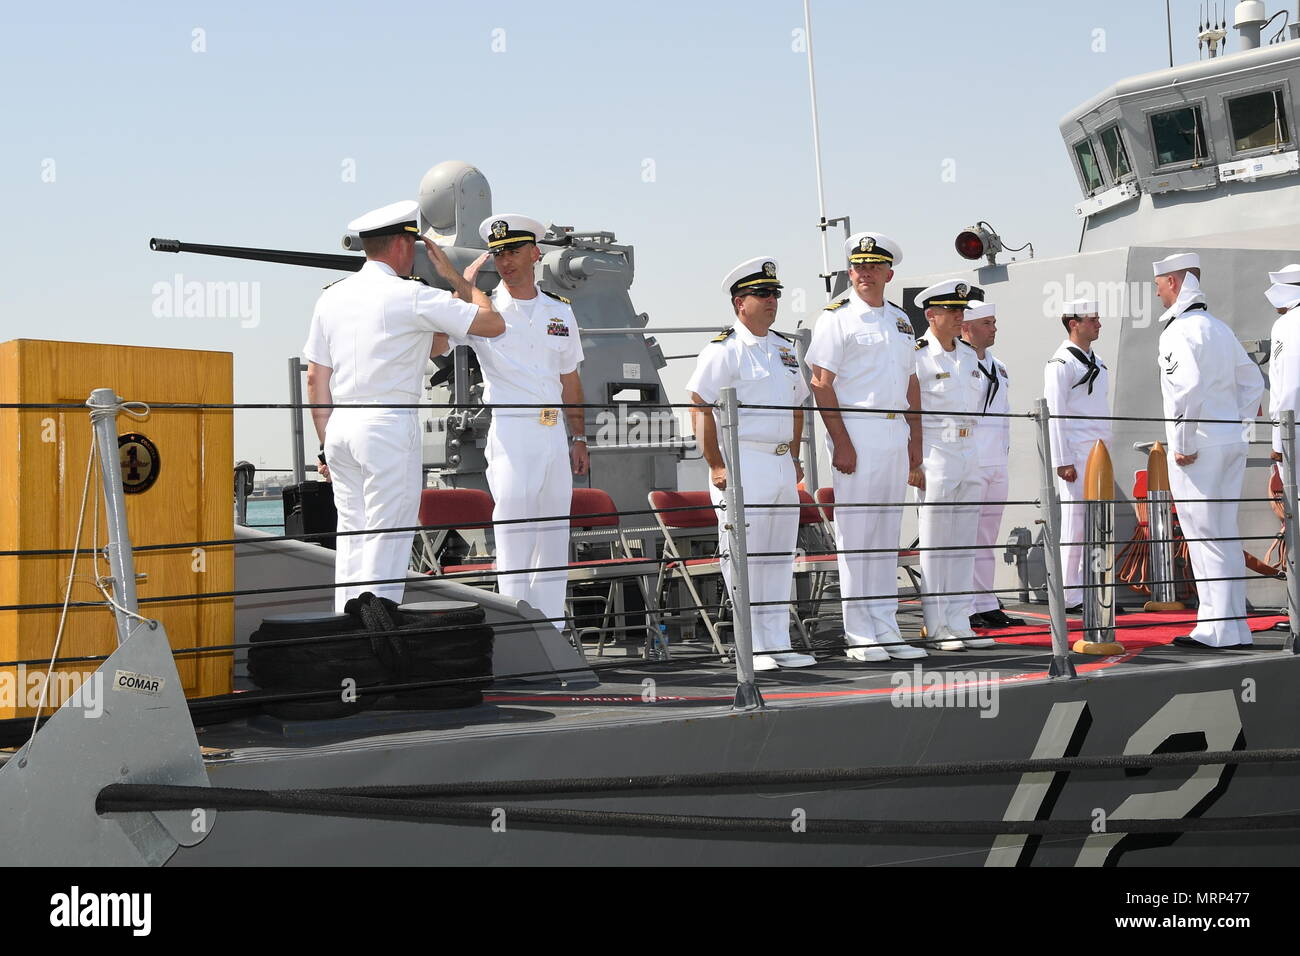 170617-N-XP344-055 MANAMA, Bahrain (June 27, 2017) From left, Lt. Cmdr. Timothy Yuhas, a native of Cave Creek, Arizona and former commanding officer of the Cyclone-class coastal patrol ship USS Thunderbolt (PC 12), salutes Lt. Cmdr. Michael T. McArawas, a native of Erie, Pennsylvania and current commanding officer, during a change of command ceremony held shipboard while pierside at Naval Support Activity Bahrain. Thunderbolt is one of 10 PCs forward deployed to Manama, Bahrain, whose mission is coastal patrol and interdiction surveillance. (U.S. Navy photo by Mass Communication Specialist 2nd Stock Photo